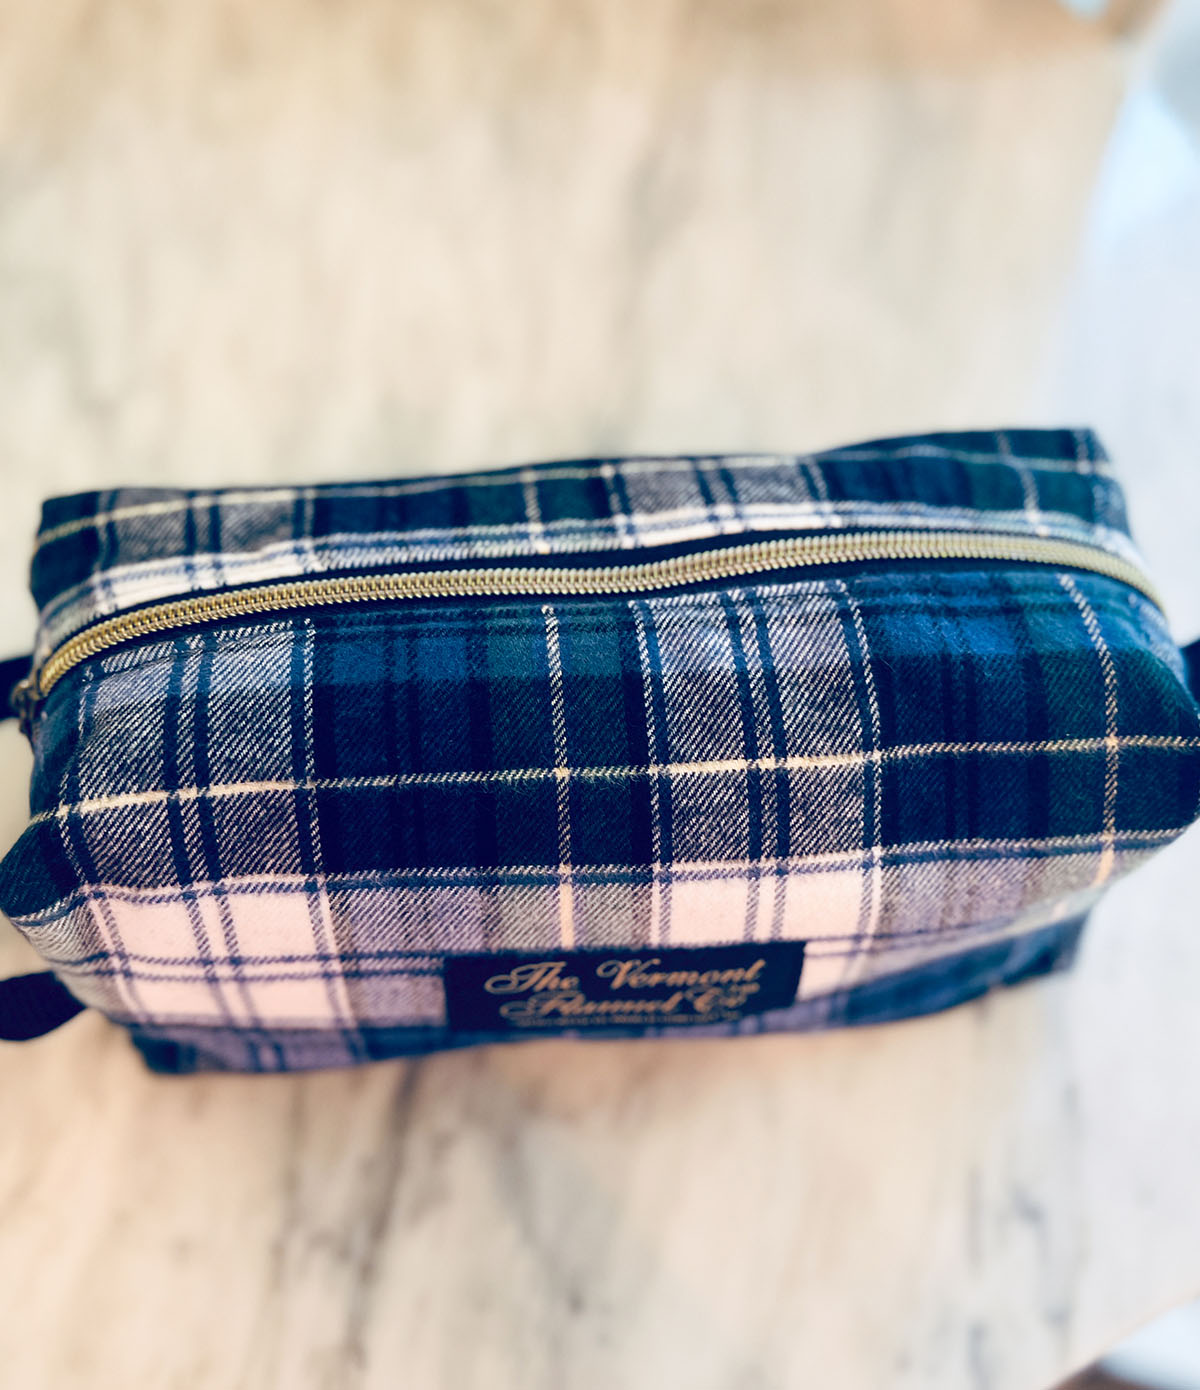 Flannel Toiletry Bag - Campbell